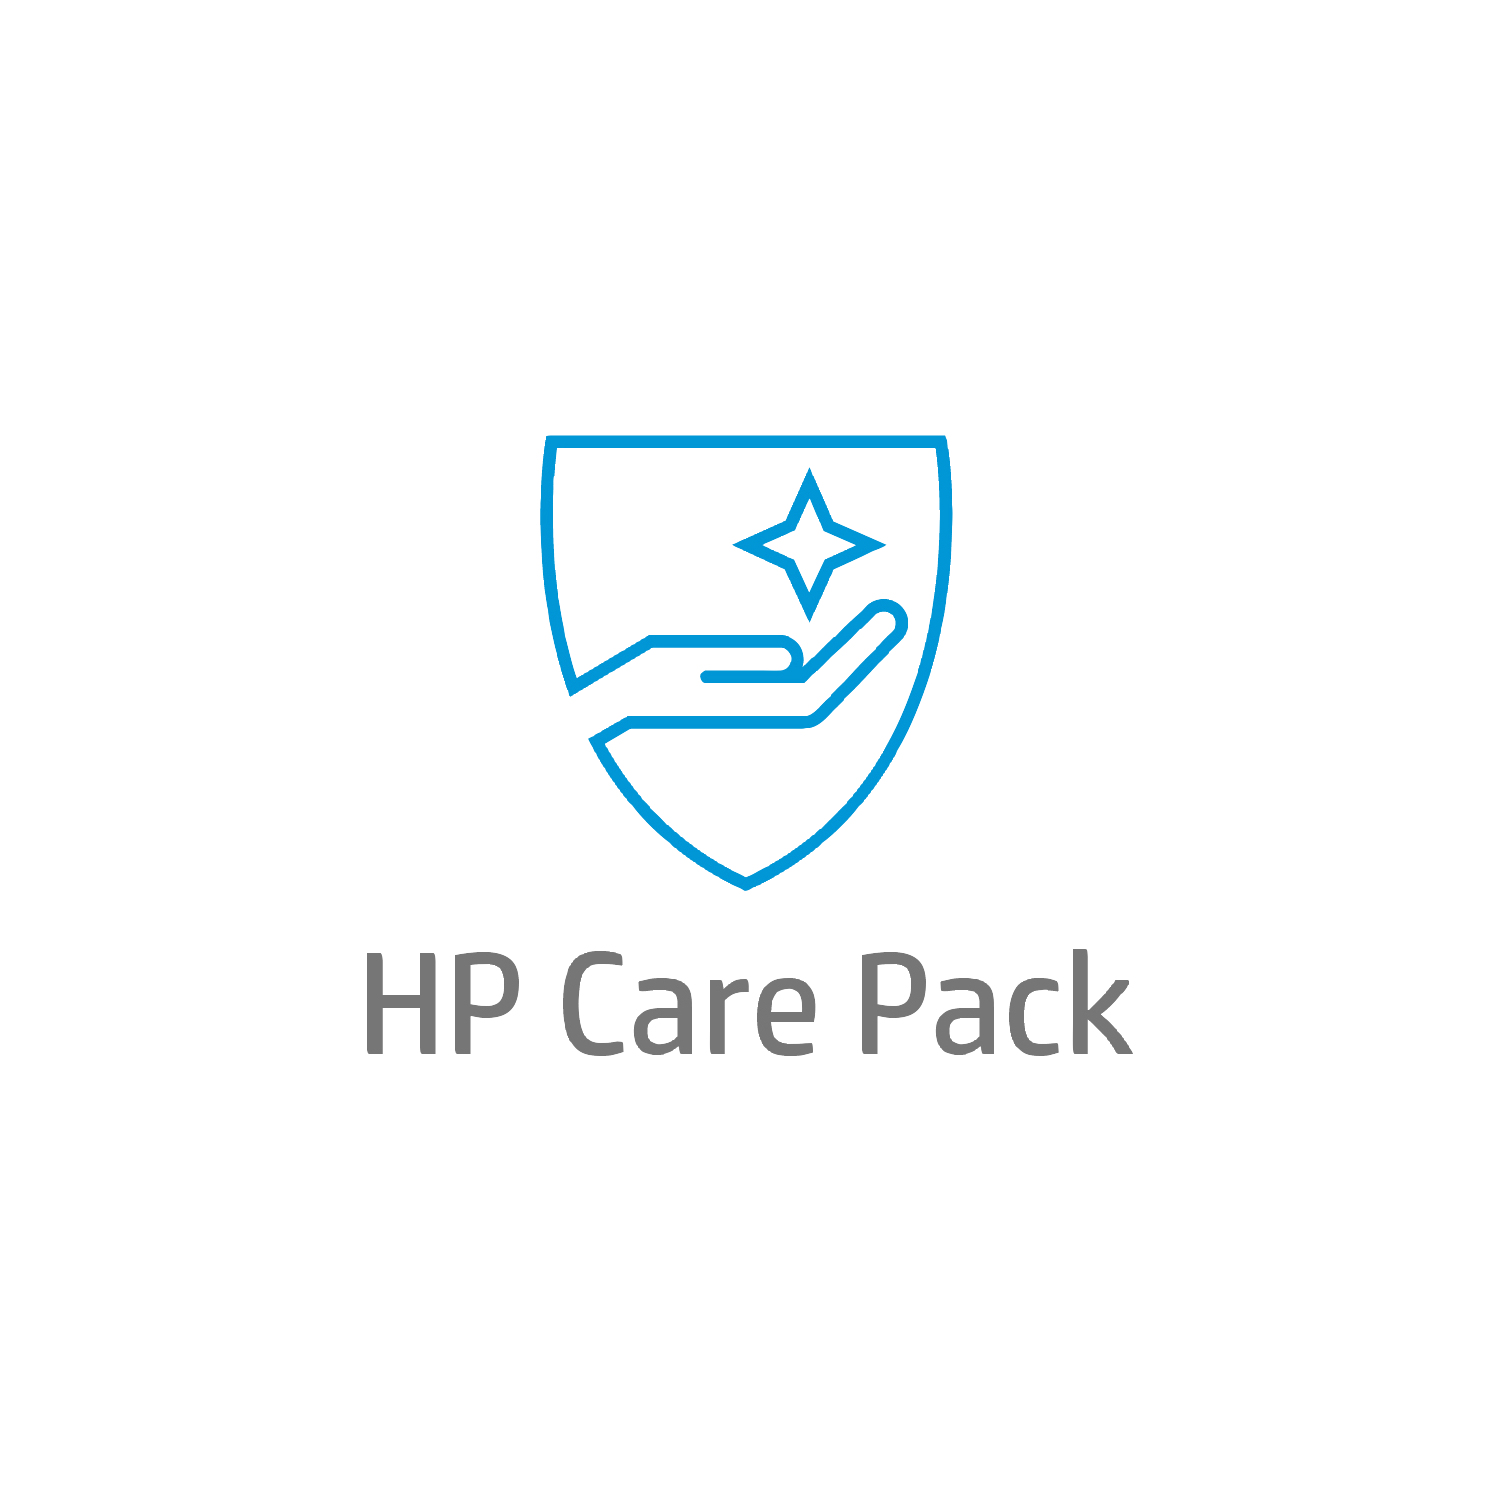 HP 4y 9x5 Workplace 1-99 License Support REQUIRED for each software lic. purchased.